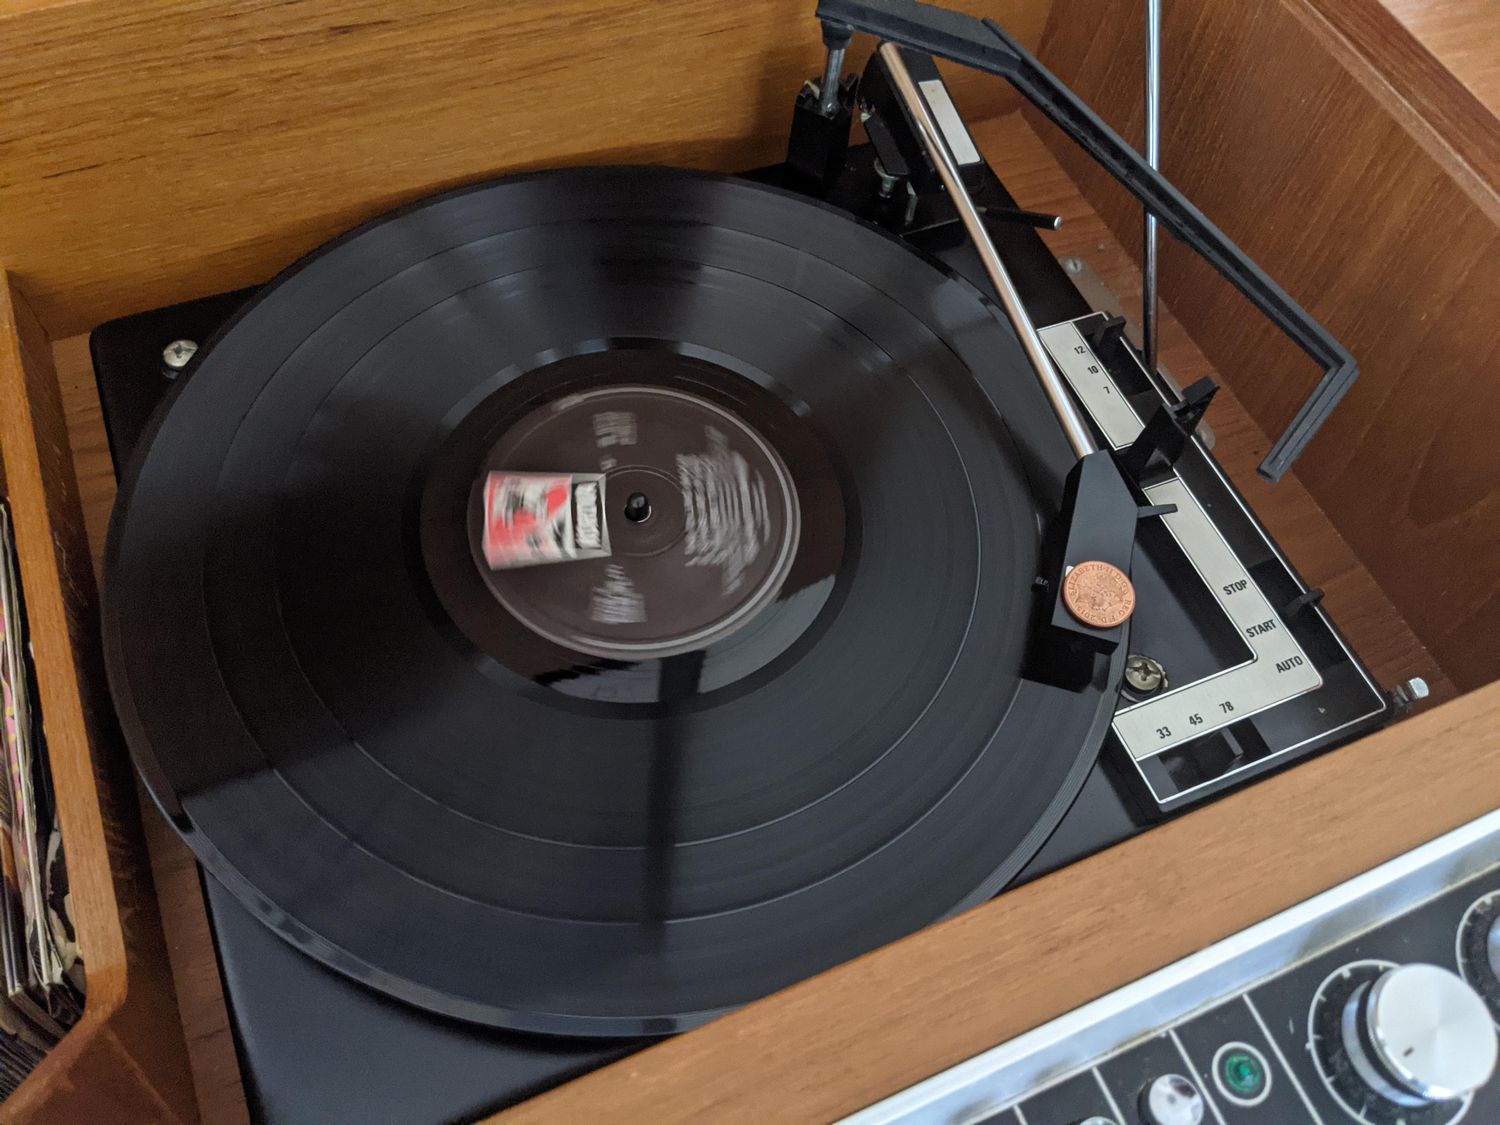 How To Remove A Turntable From A Bsr Record Player